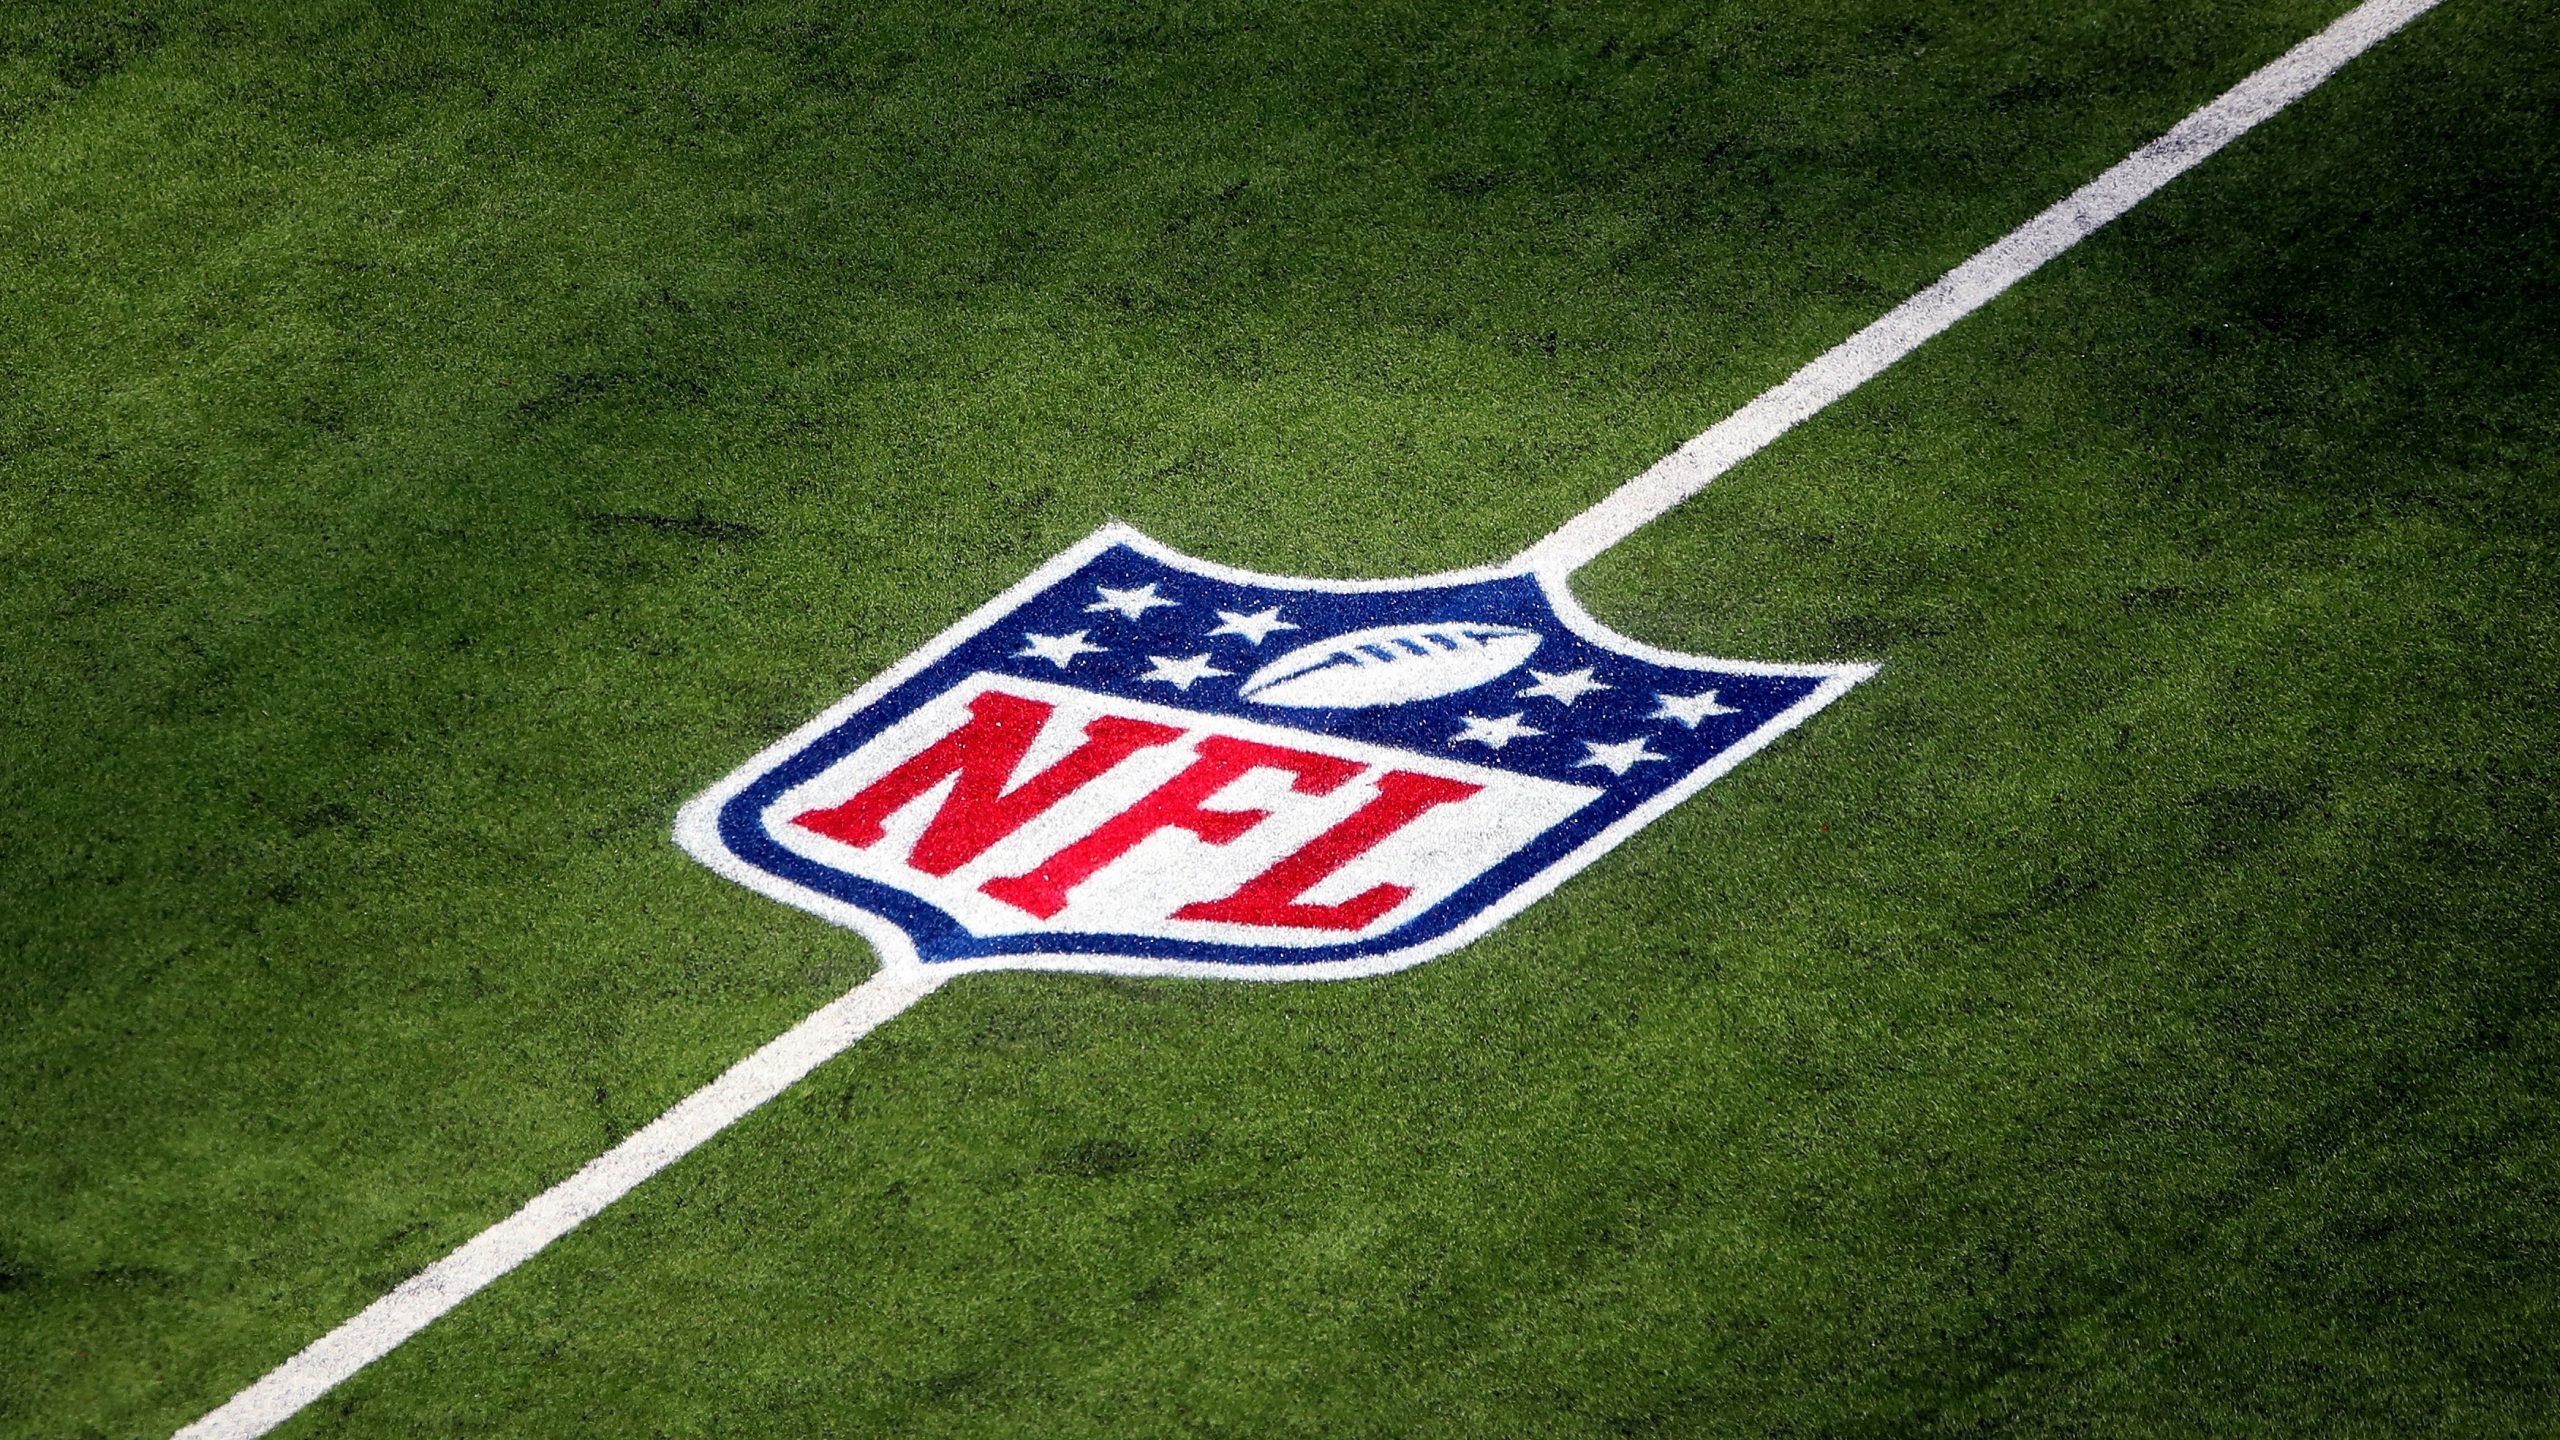 NFL to increase COVID protocols ahead of Thanksgiving regardless of vaccine status